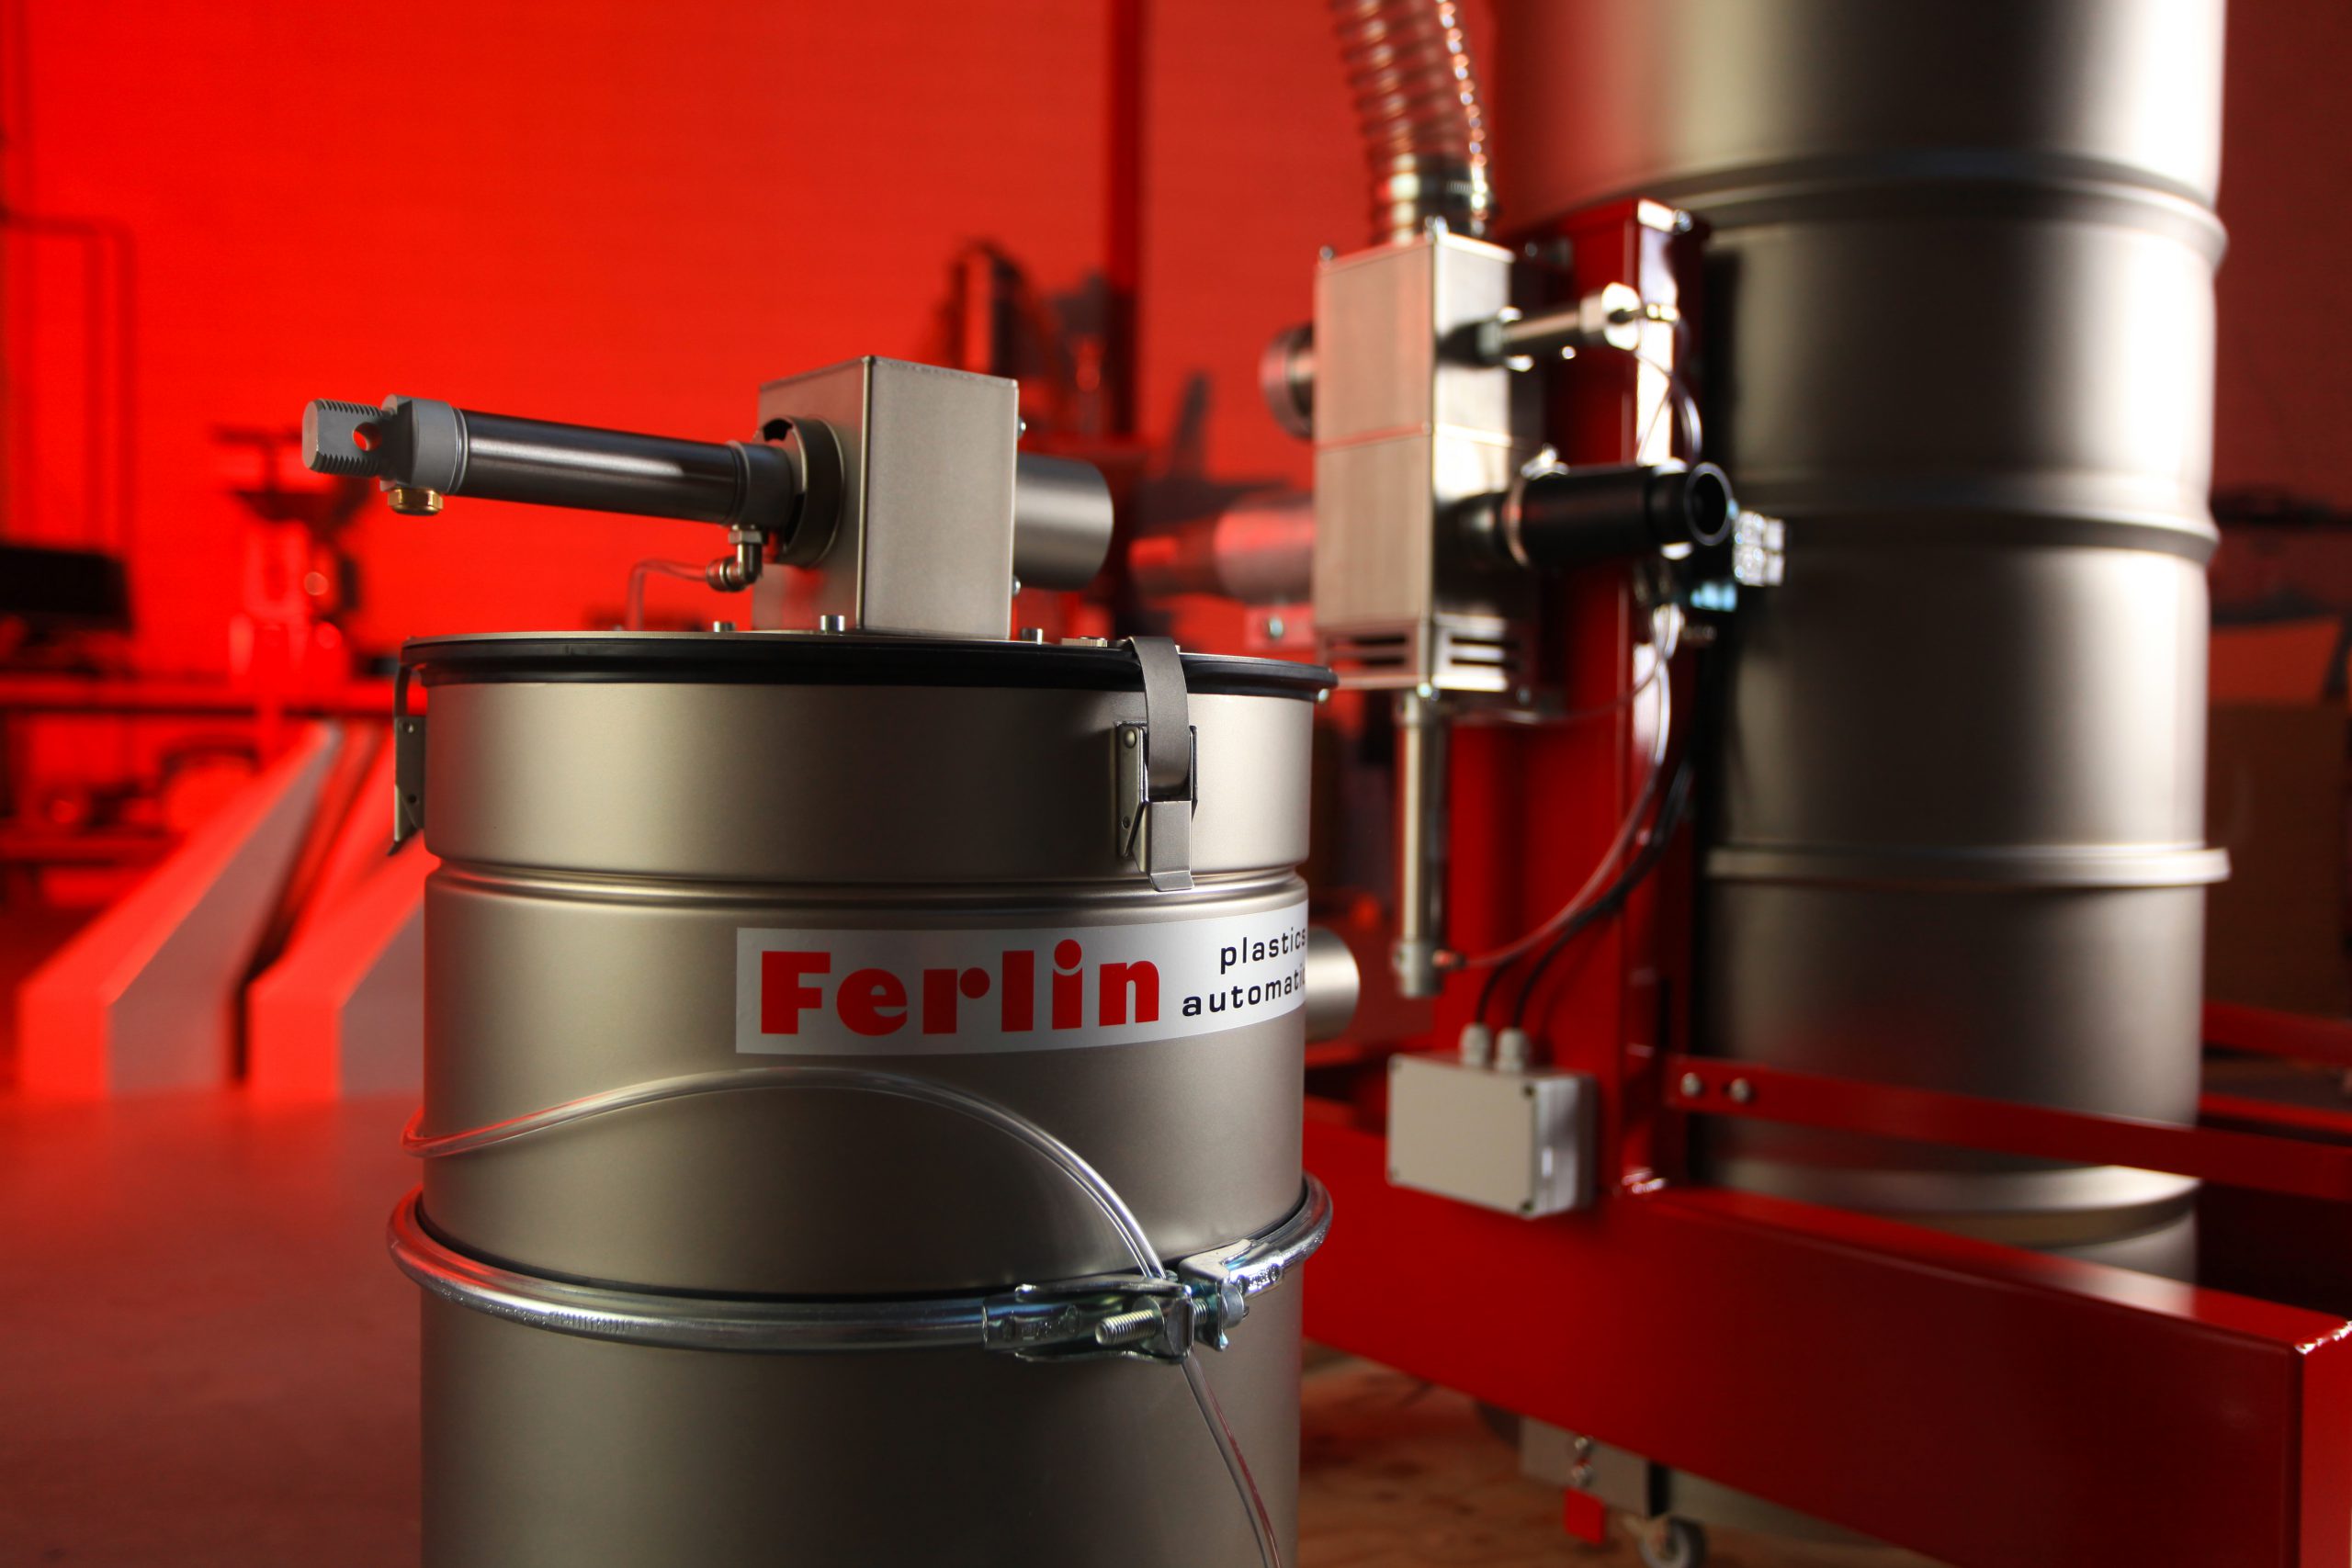 Save on your production costs with Ferlin